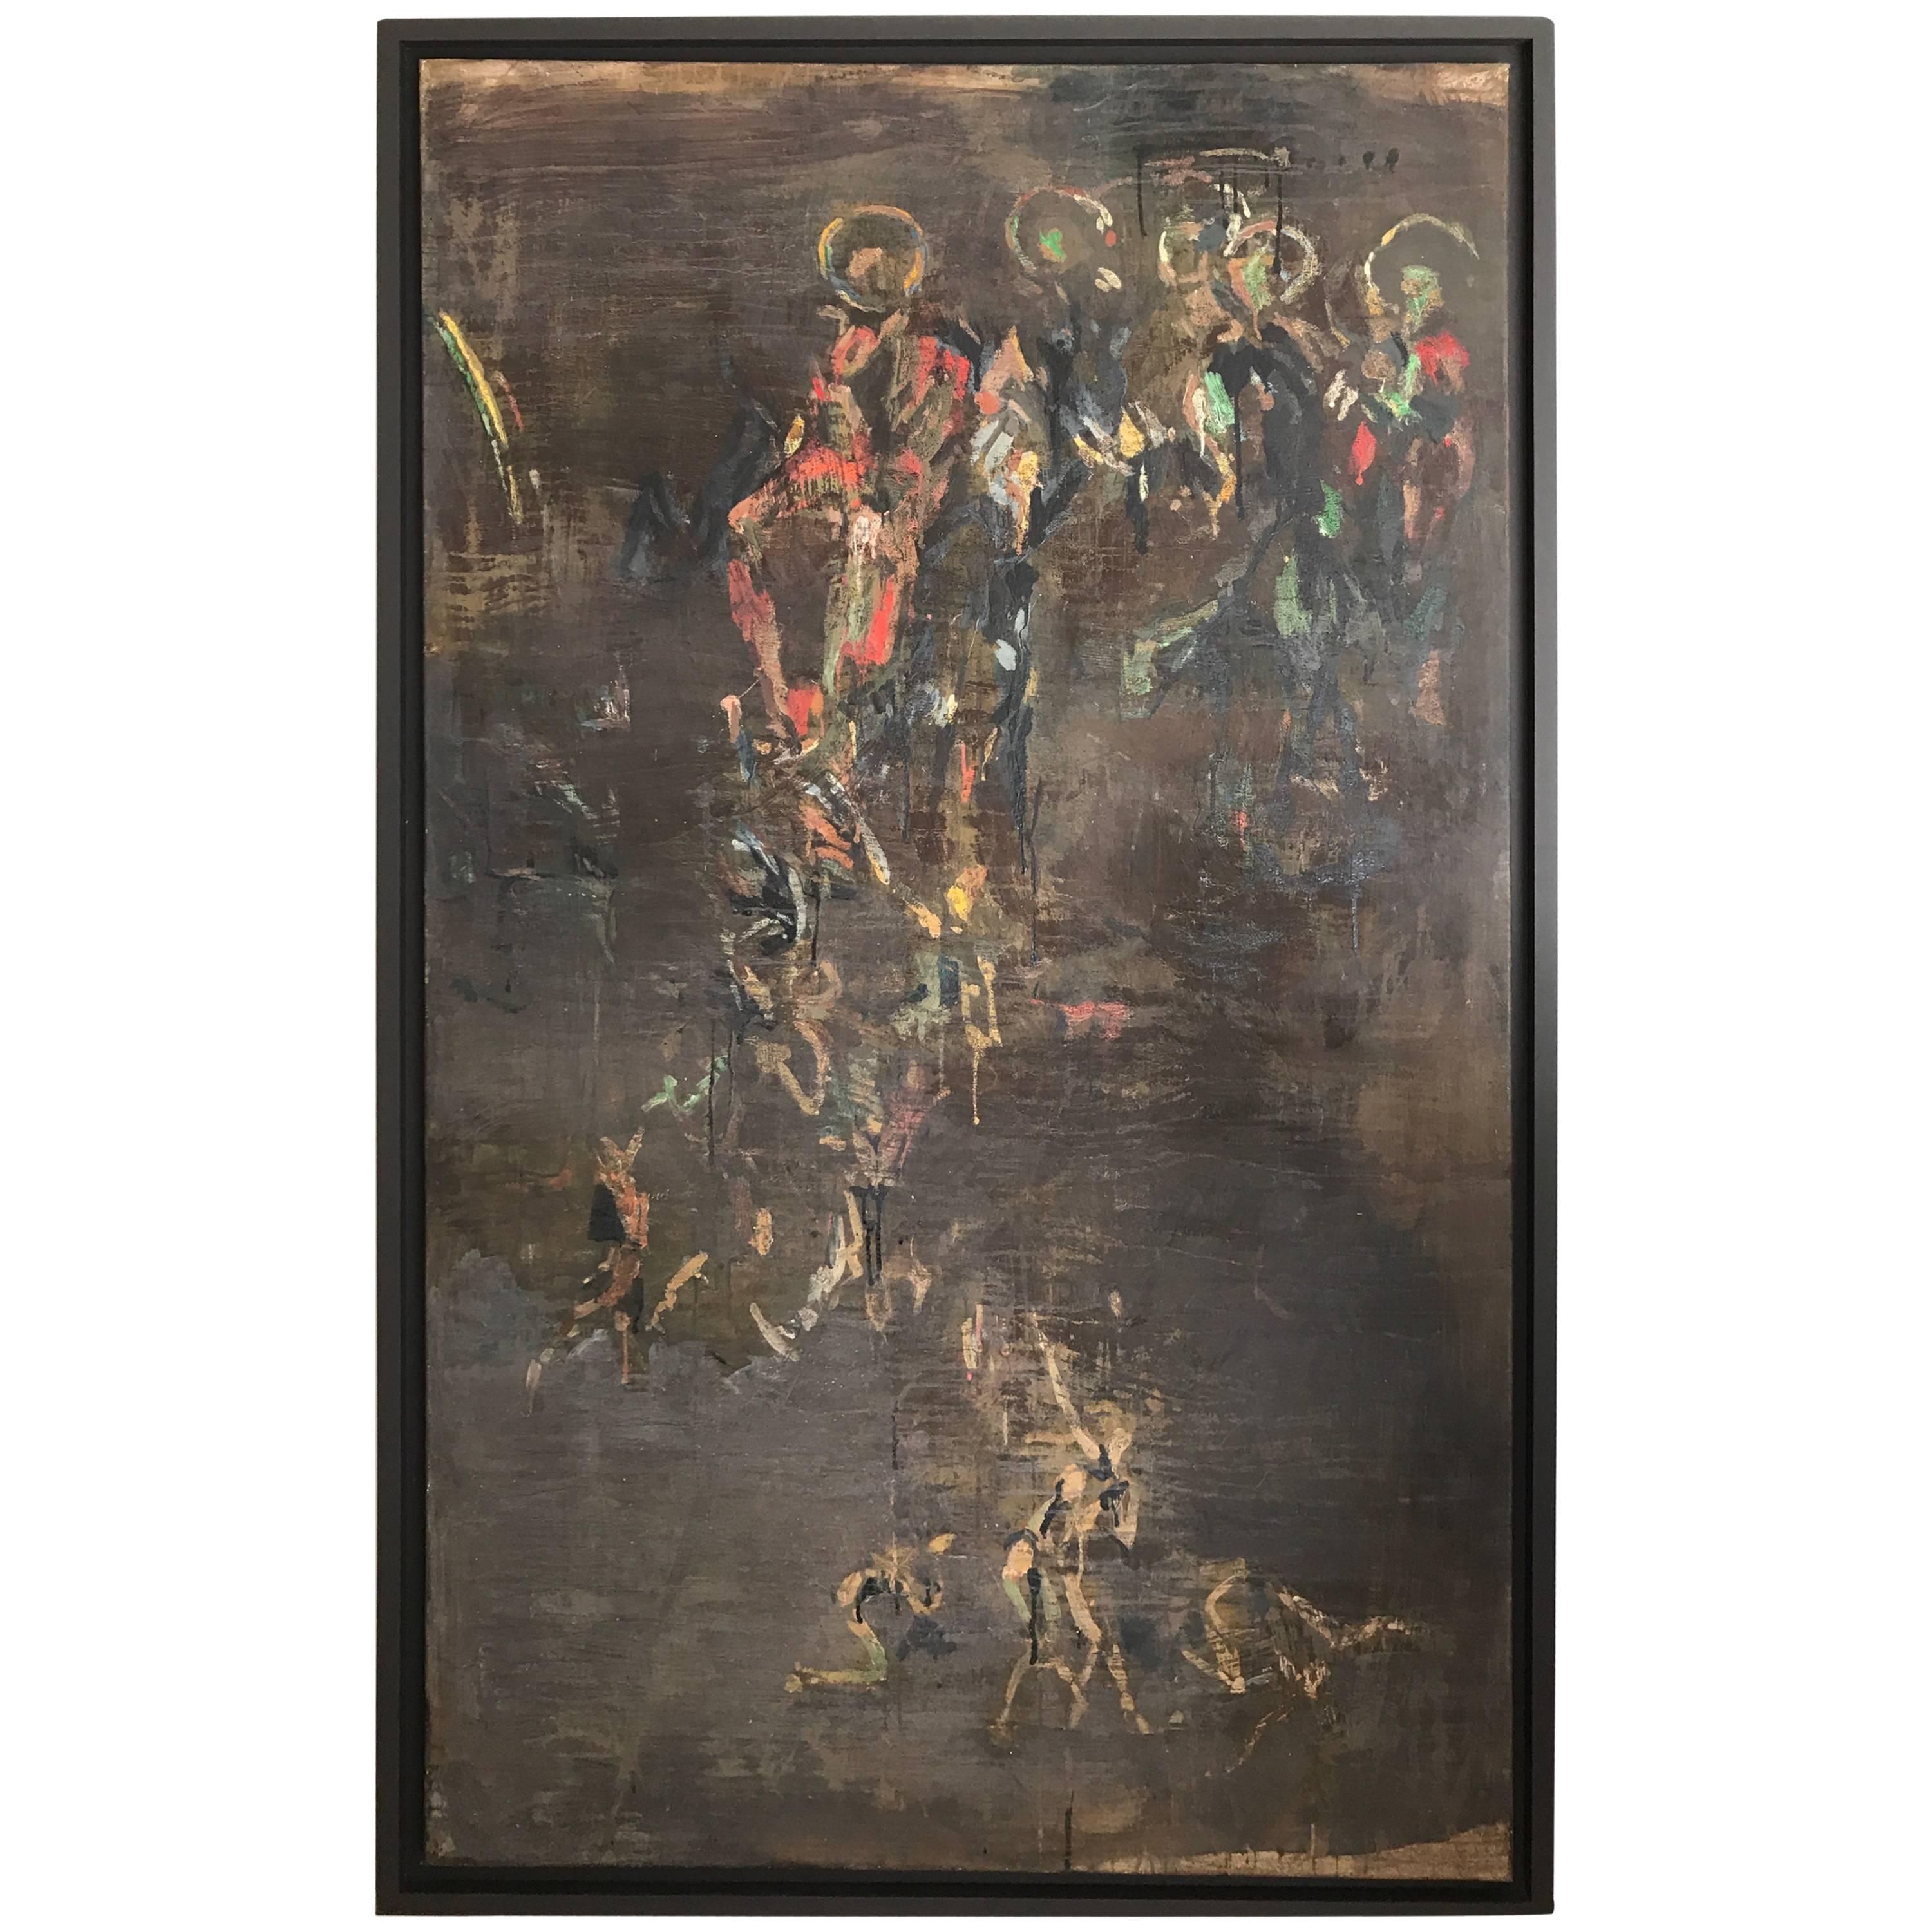 "The Last Judgement" Painting by Walter Vilain, 1996-1997